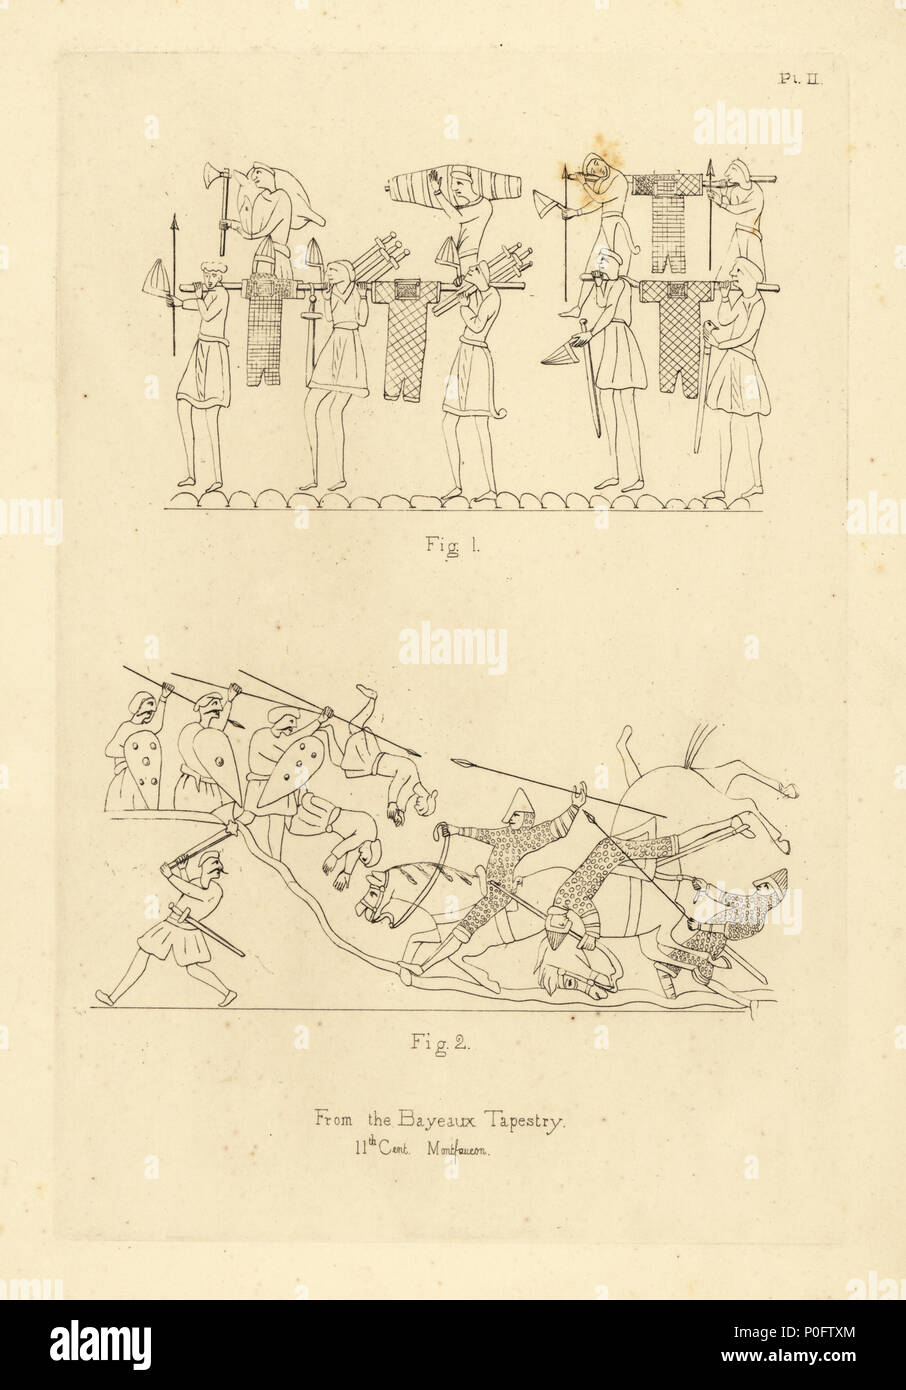 Saxon and Norman military costume from the Bayeux Tapestry, 11th century. Norman soldiers carrying chainmail hauberks or suits of armour 1, and Saxon infantry repulsing Norman cavalry with spears and axes 2. Copperplate engraving from Thomas Anthony Day and J.H. Dines' Illustrations of Mediaeval Costume in England collected from manuscripts in the British Museum, Bibliotheque Nationale de Paris, Bosworth, London, 1853. Stock Photo